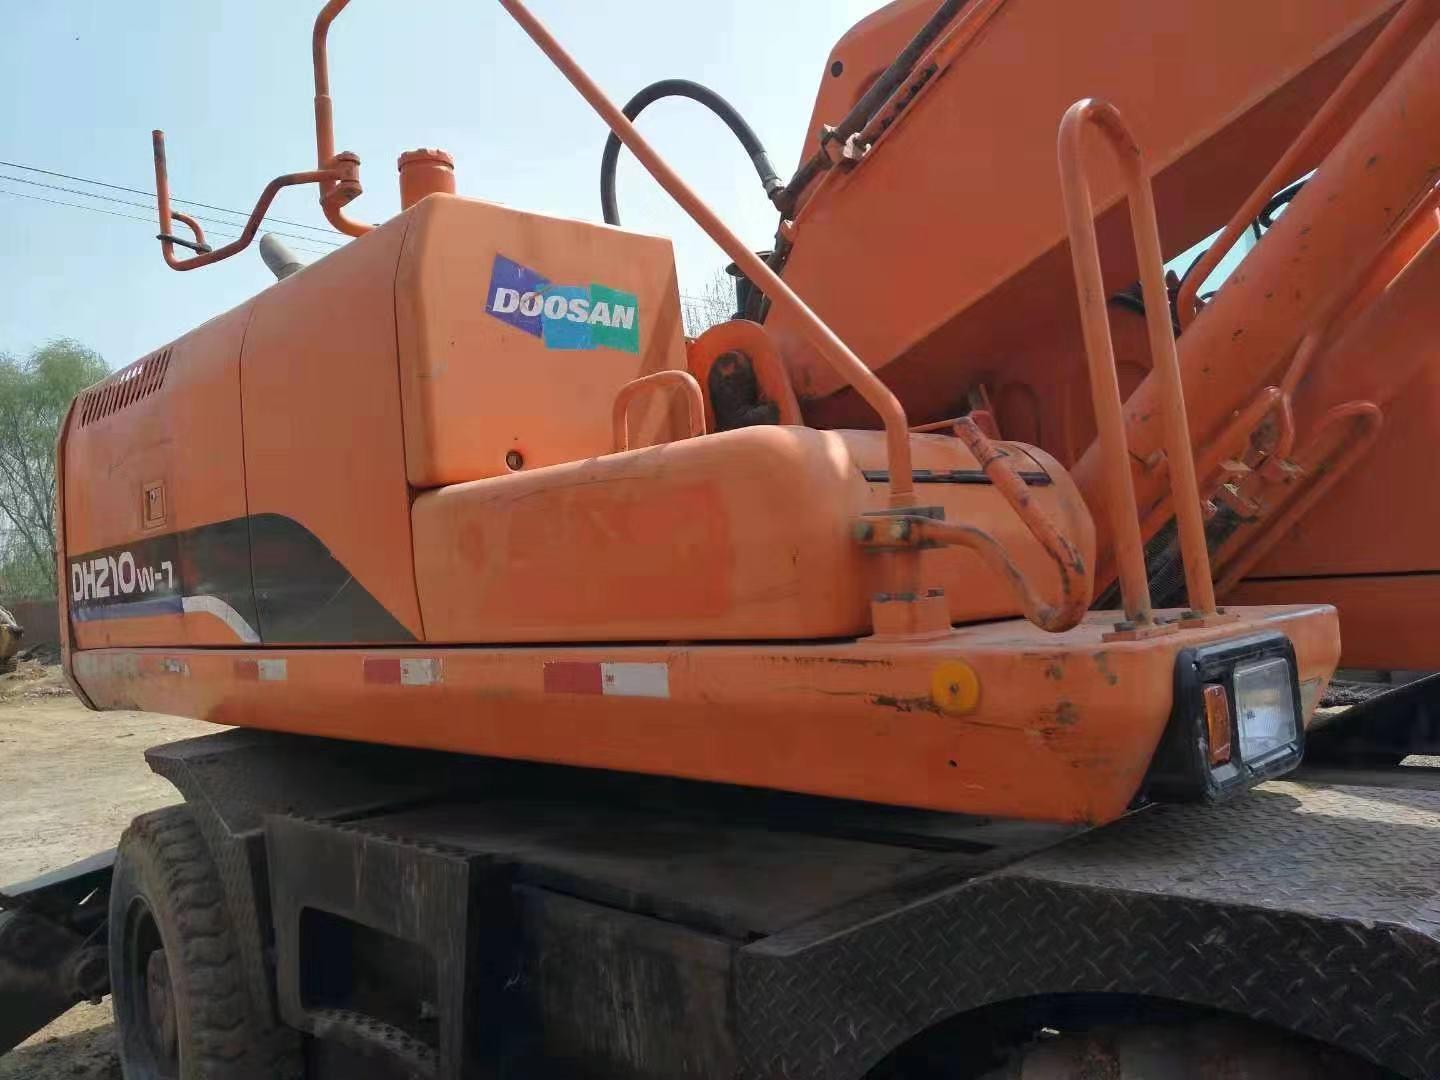 Used Doosan Dh210-7 Excavator with High Quality in Low Price